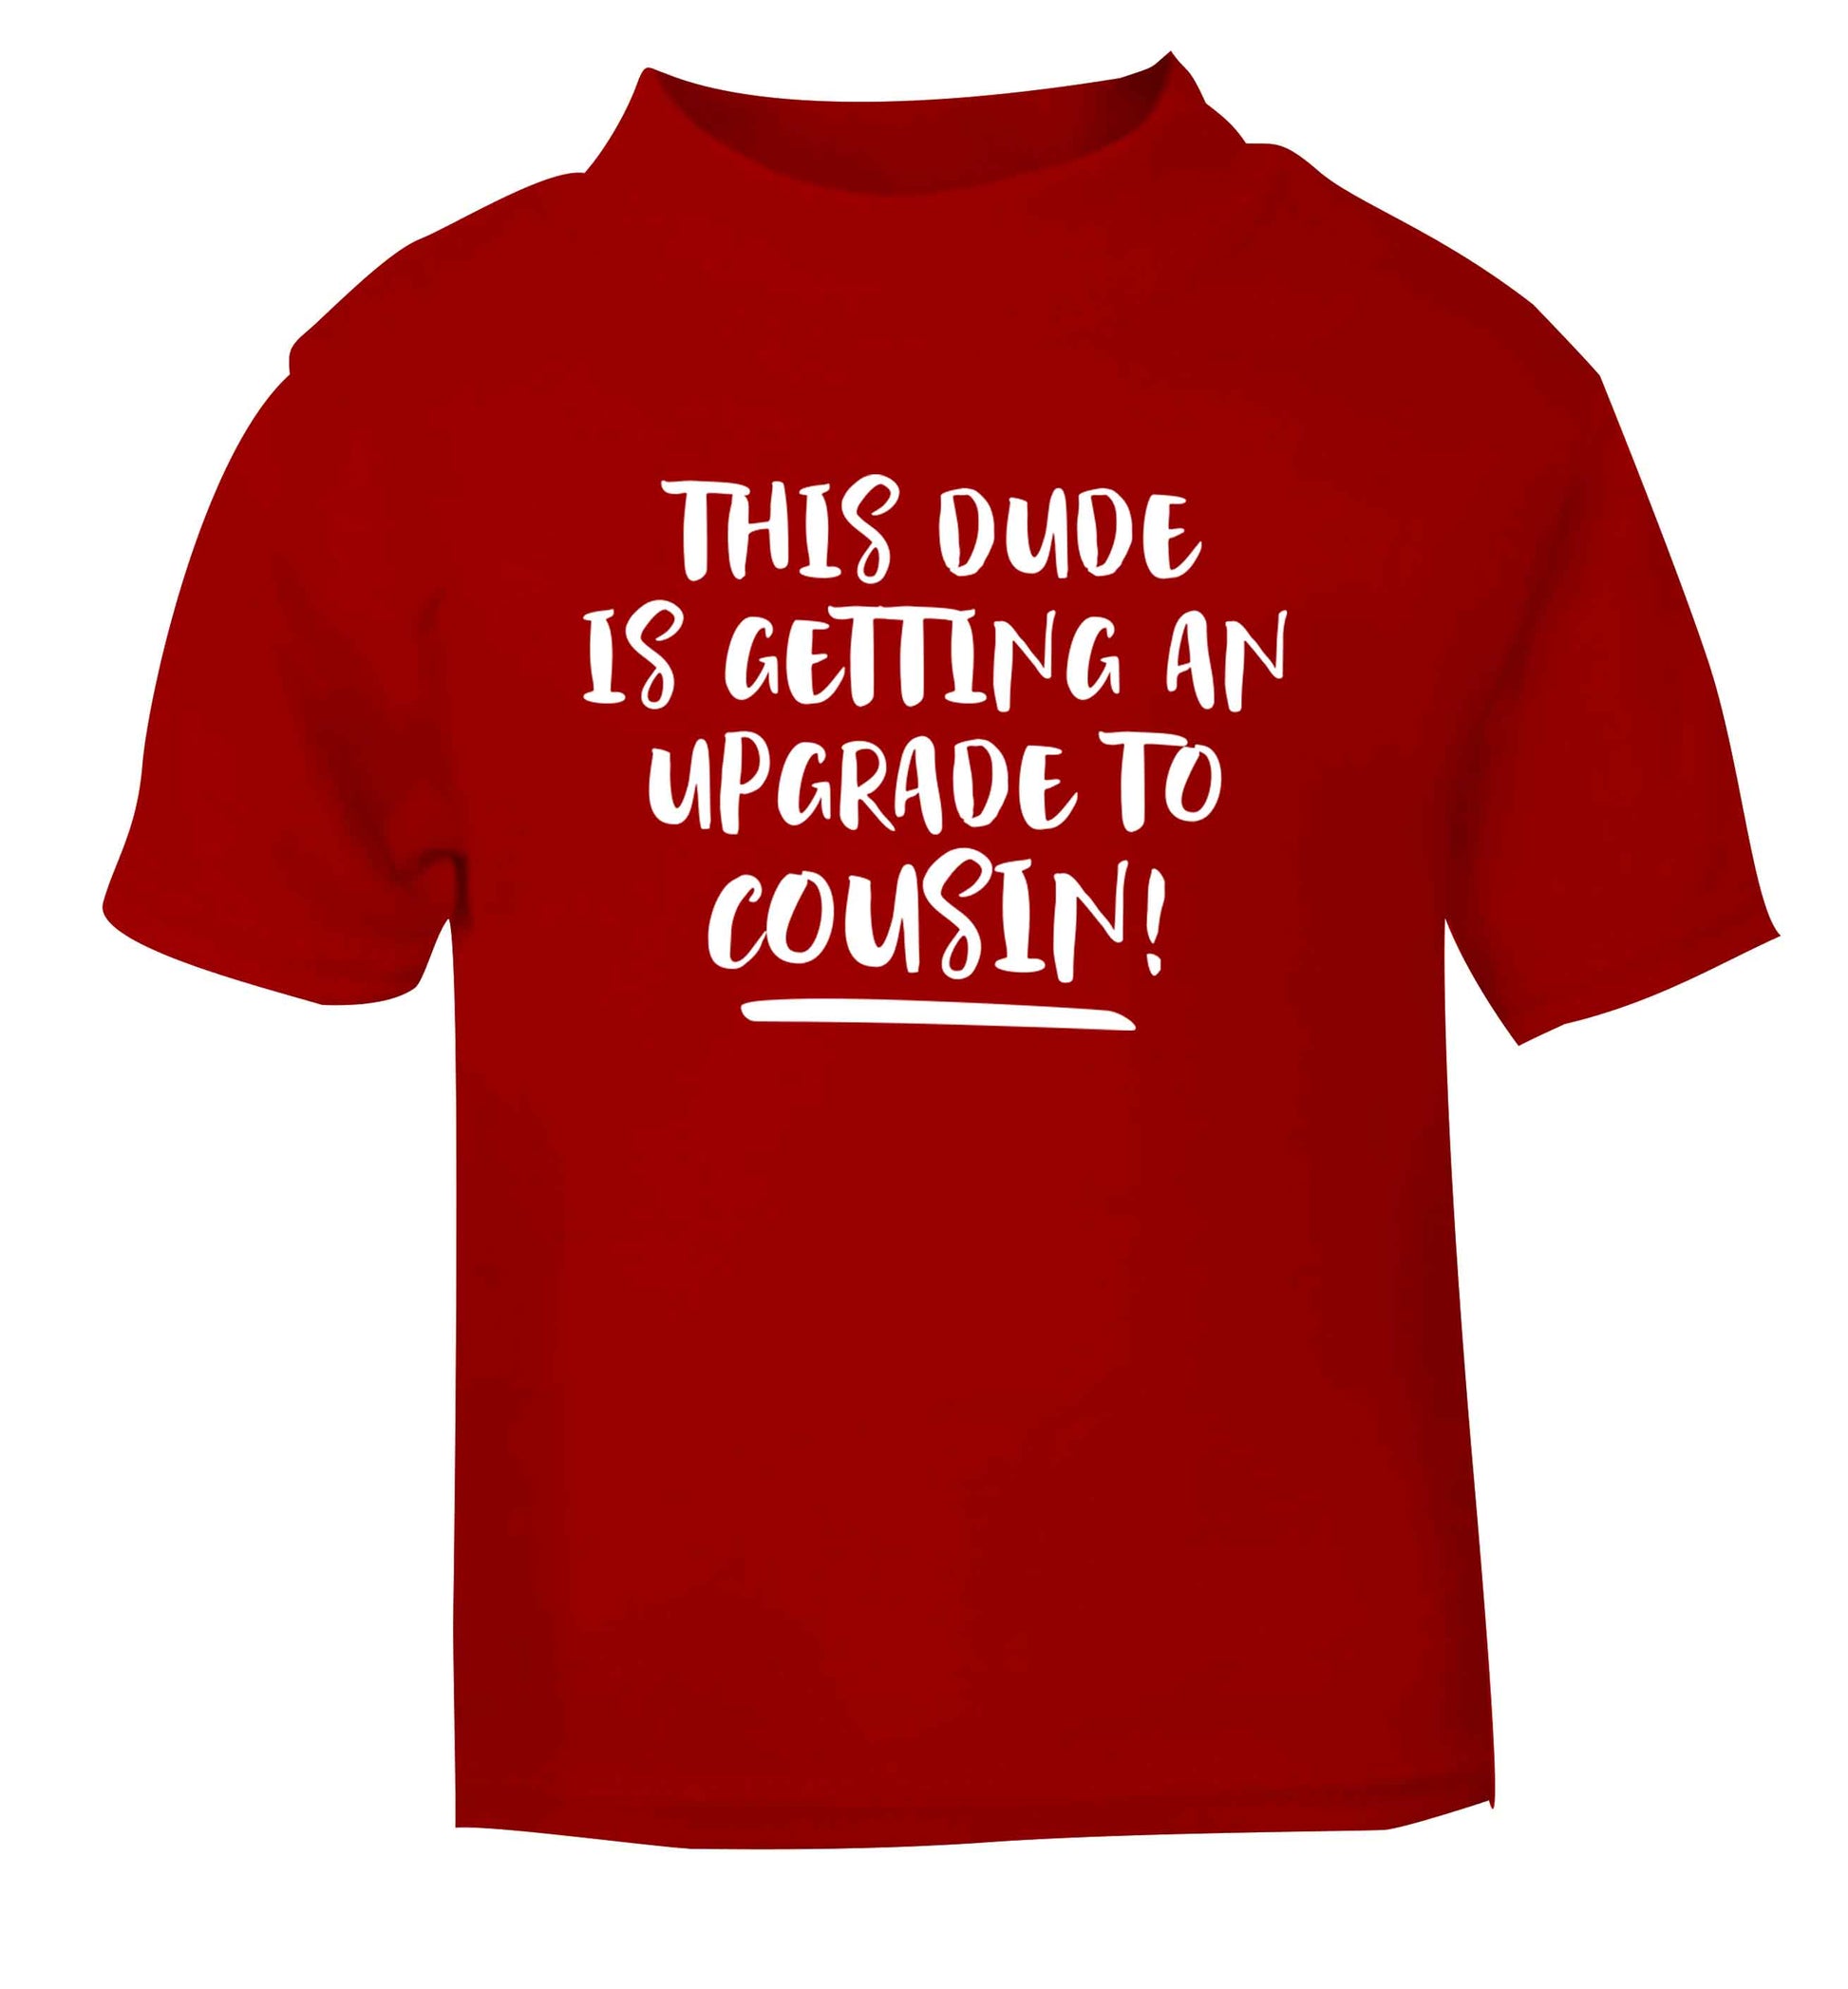 This dude is getting an upgrade to cousin! red Baby Toddler Tshirt 2 Years